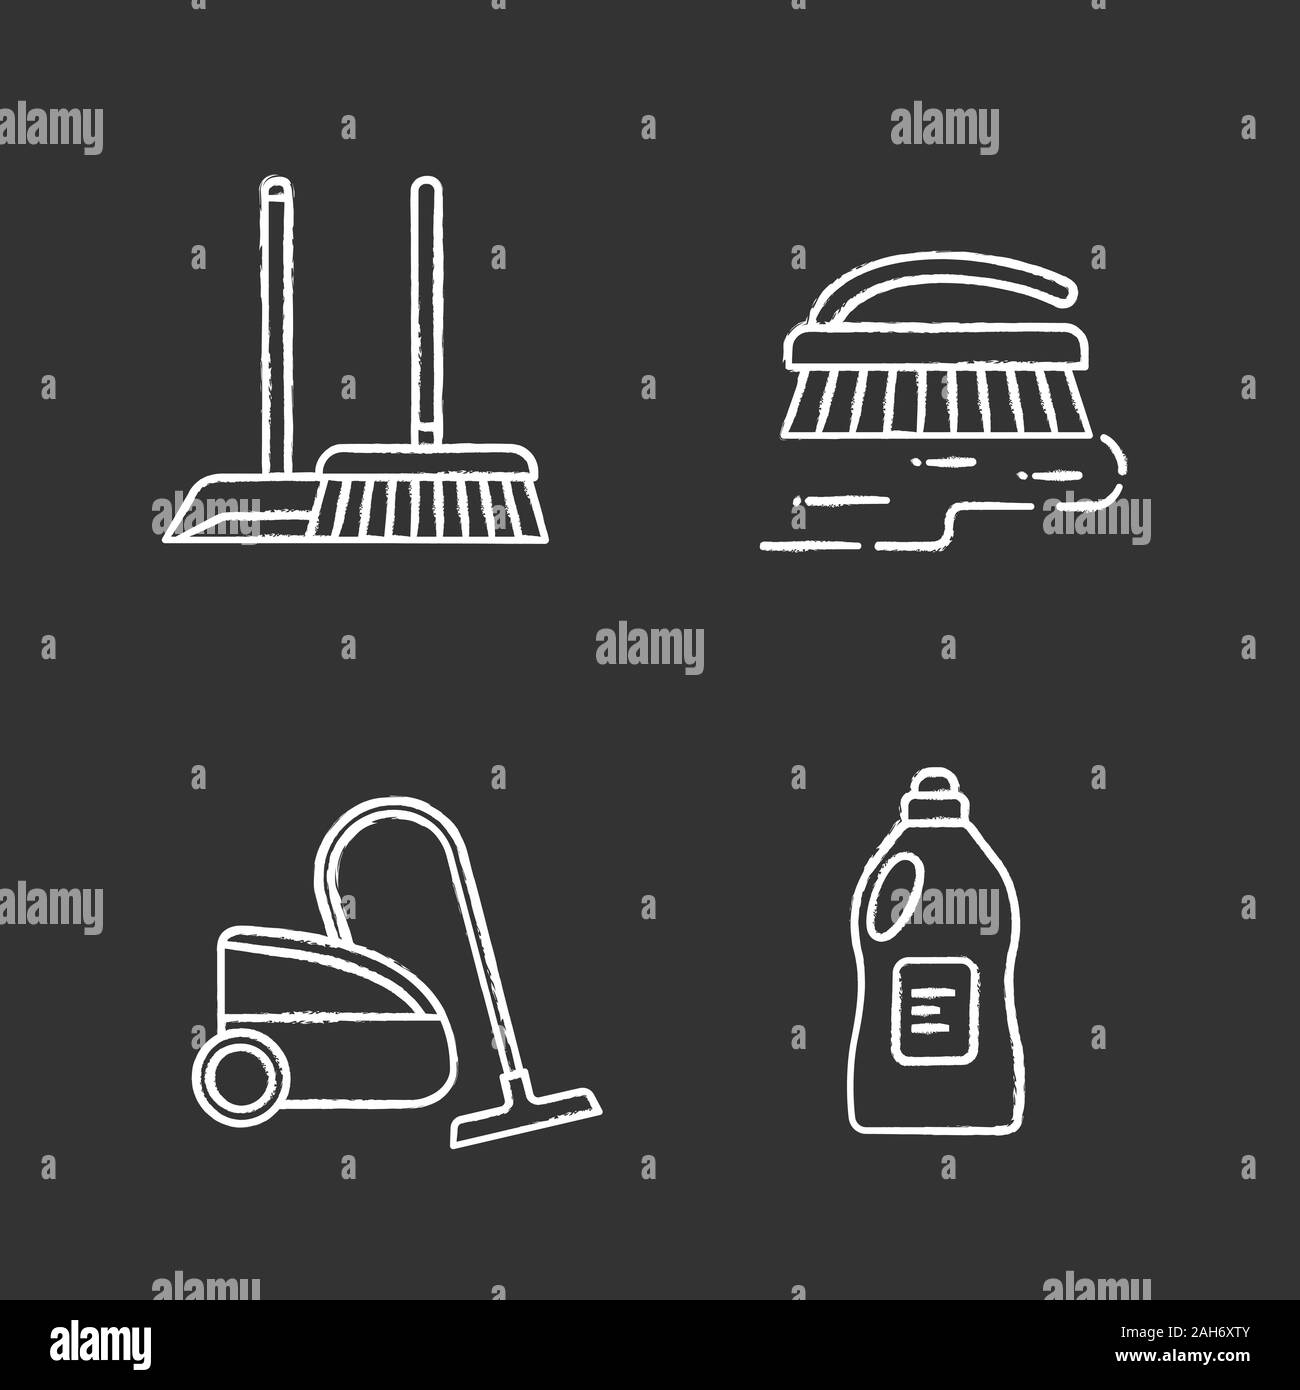 https://c8.alamy.com/comp/2AH6XTY/cleaning-service-chalk-icons-set-scoop-and-sweeping-brush-vacuum-cleaner-scrub-brush-cleaning-product-isolated-vector-chalkboard-illustrations-2AH6XTY.jpg